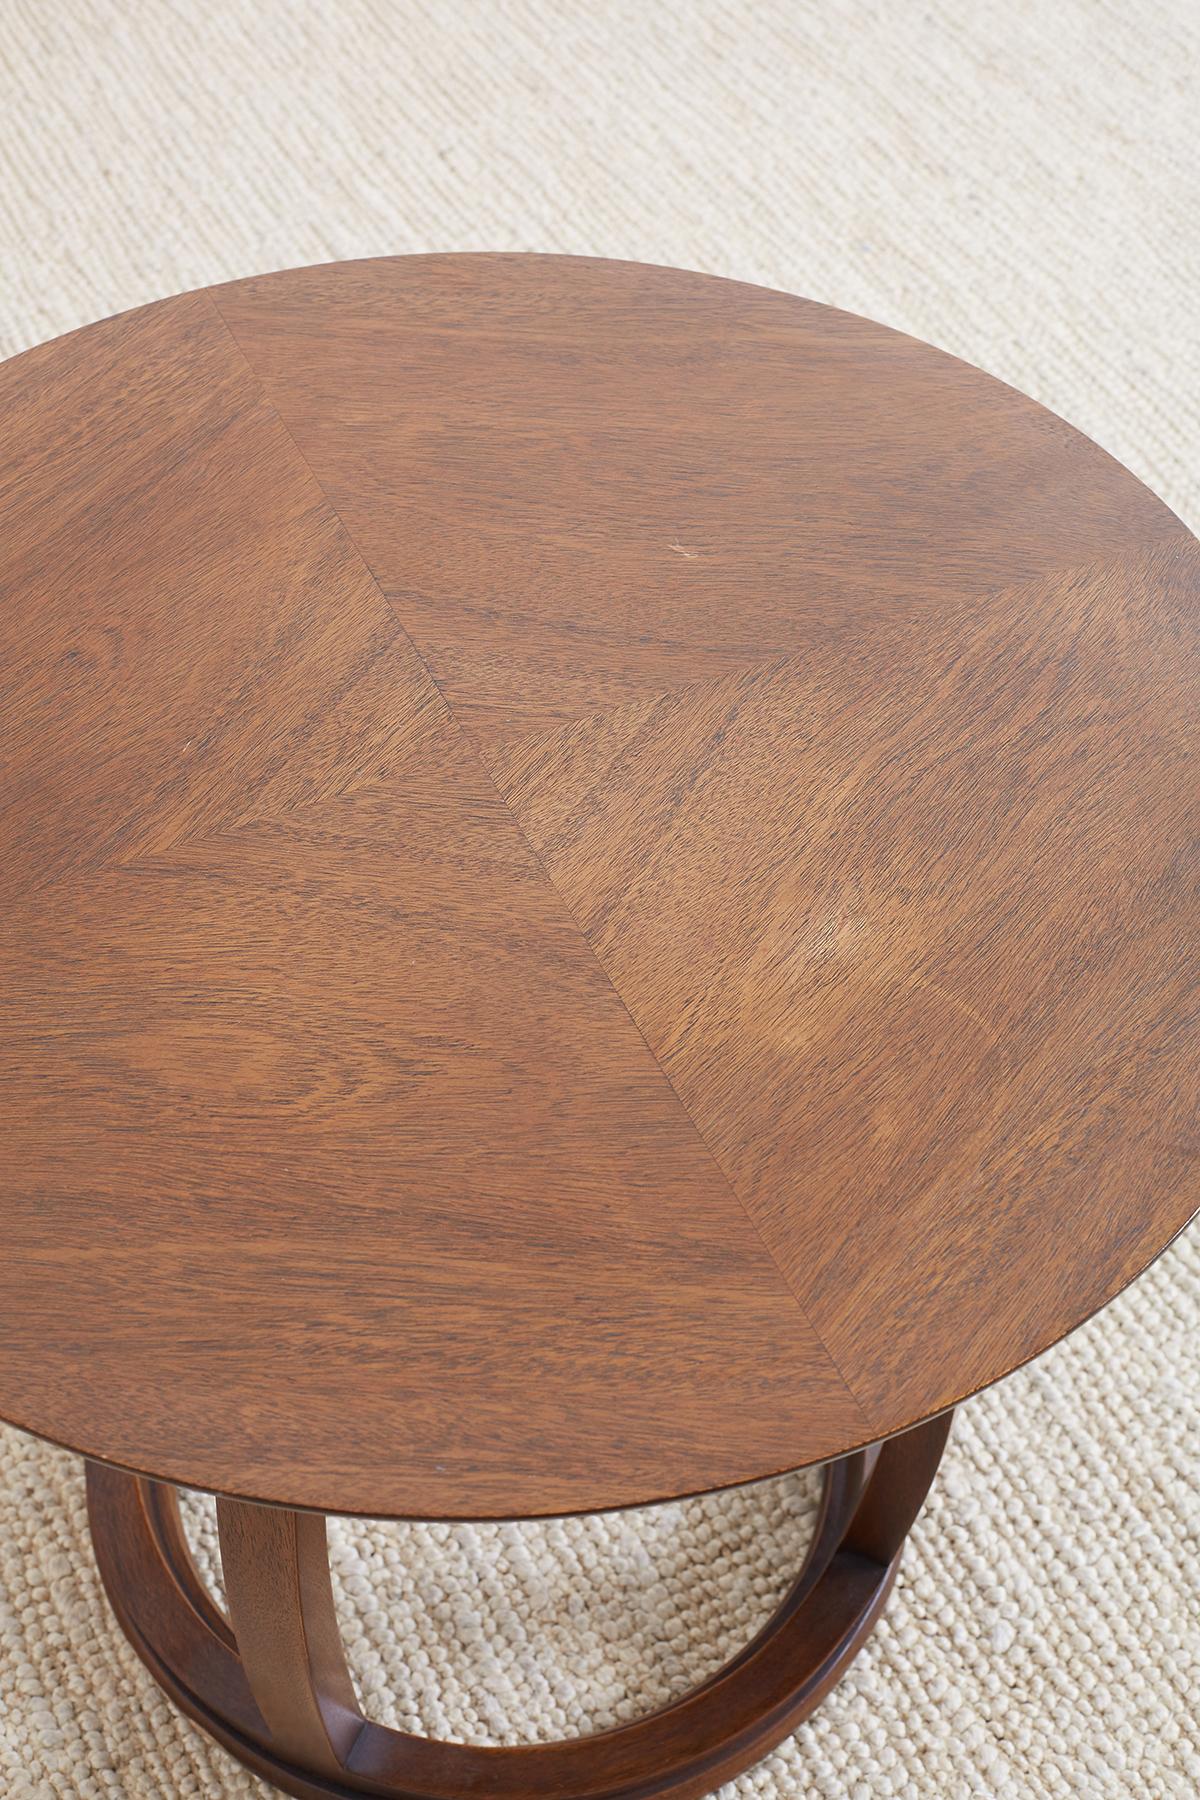 20th Century Round Mahogany Drinks Table or Tabouret 